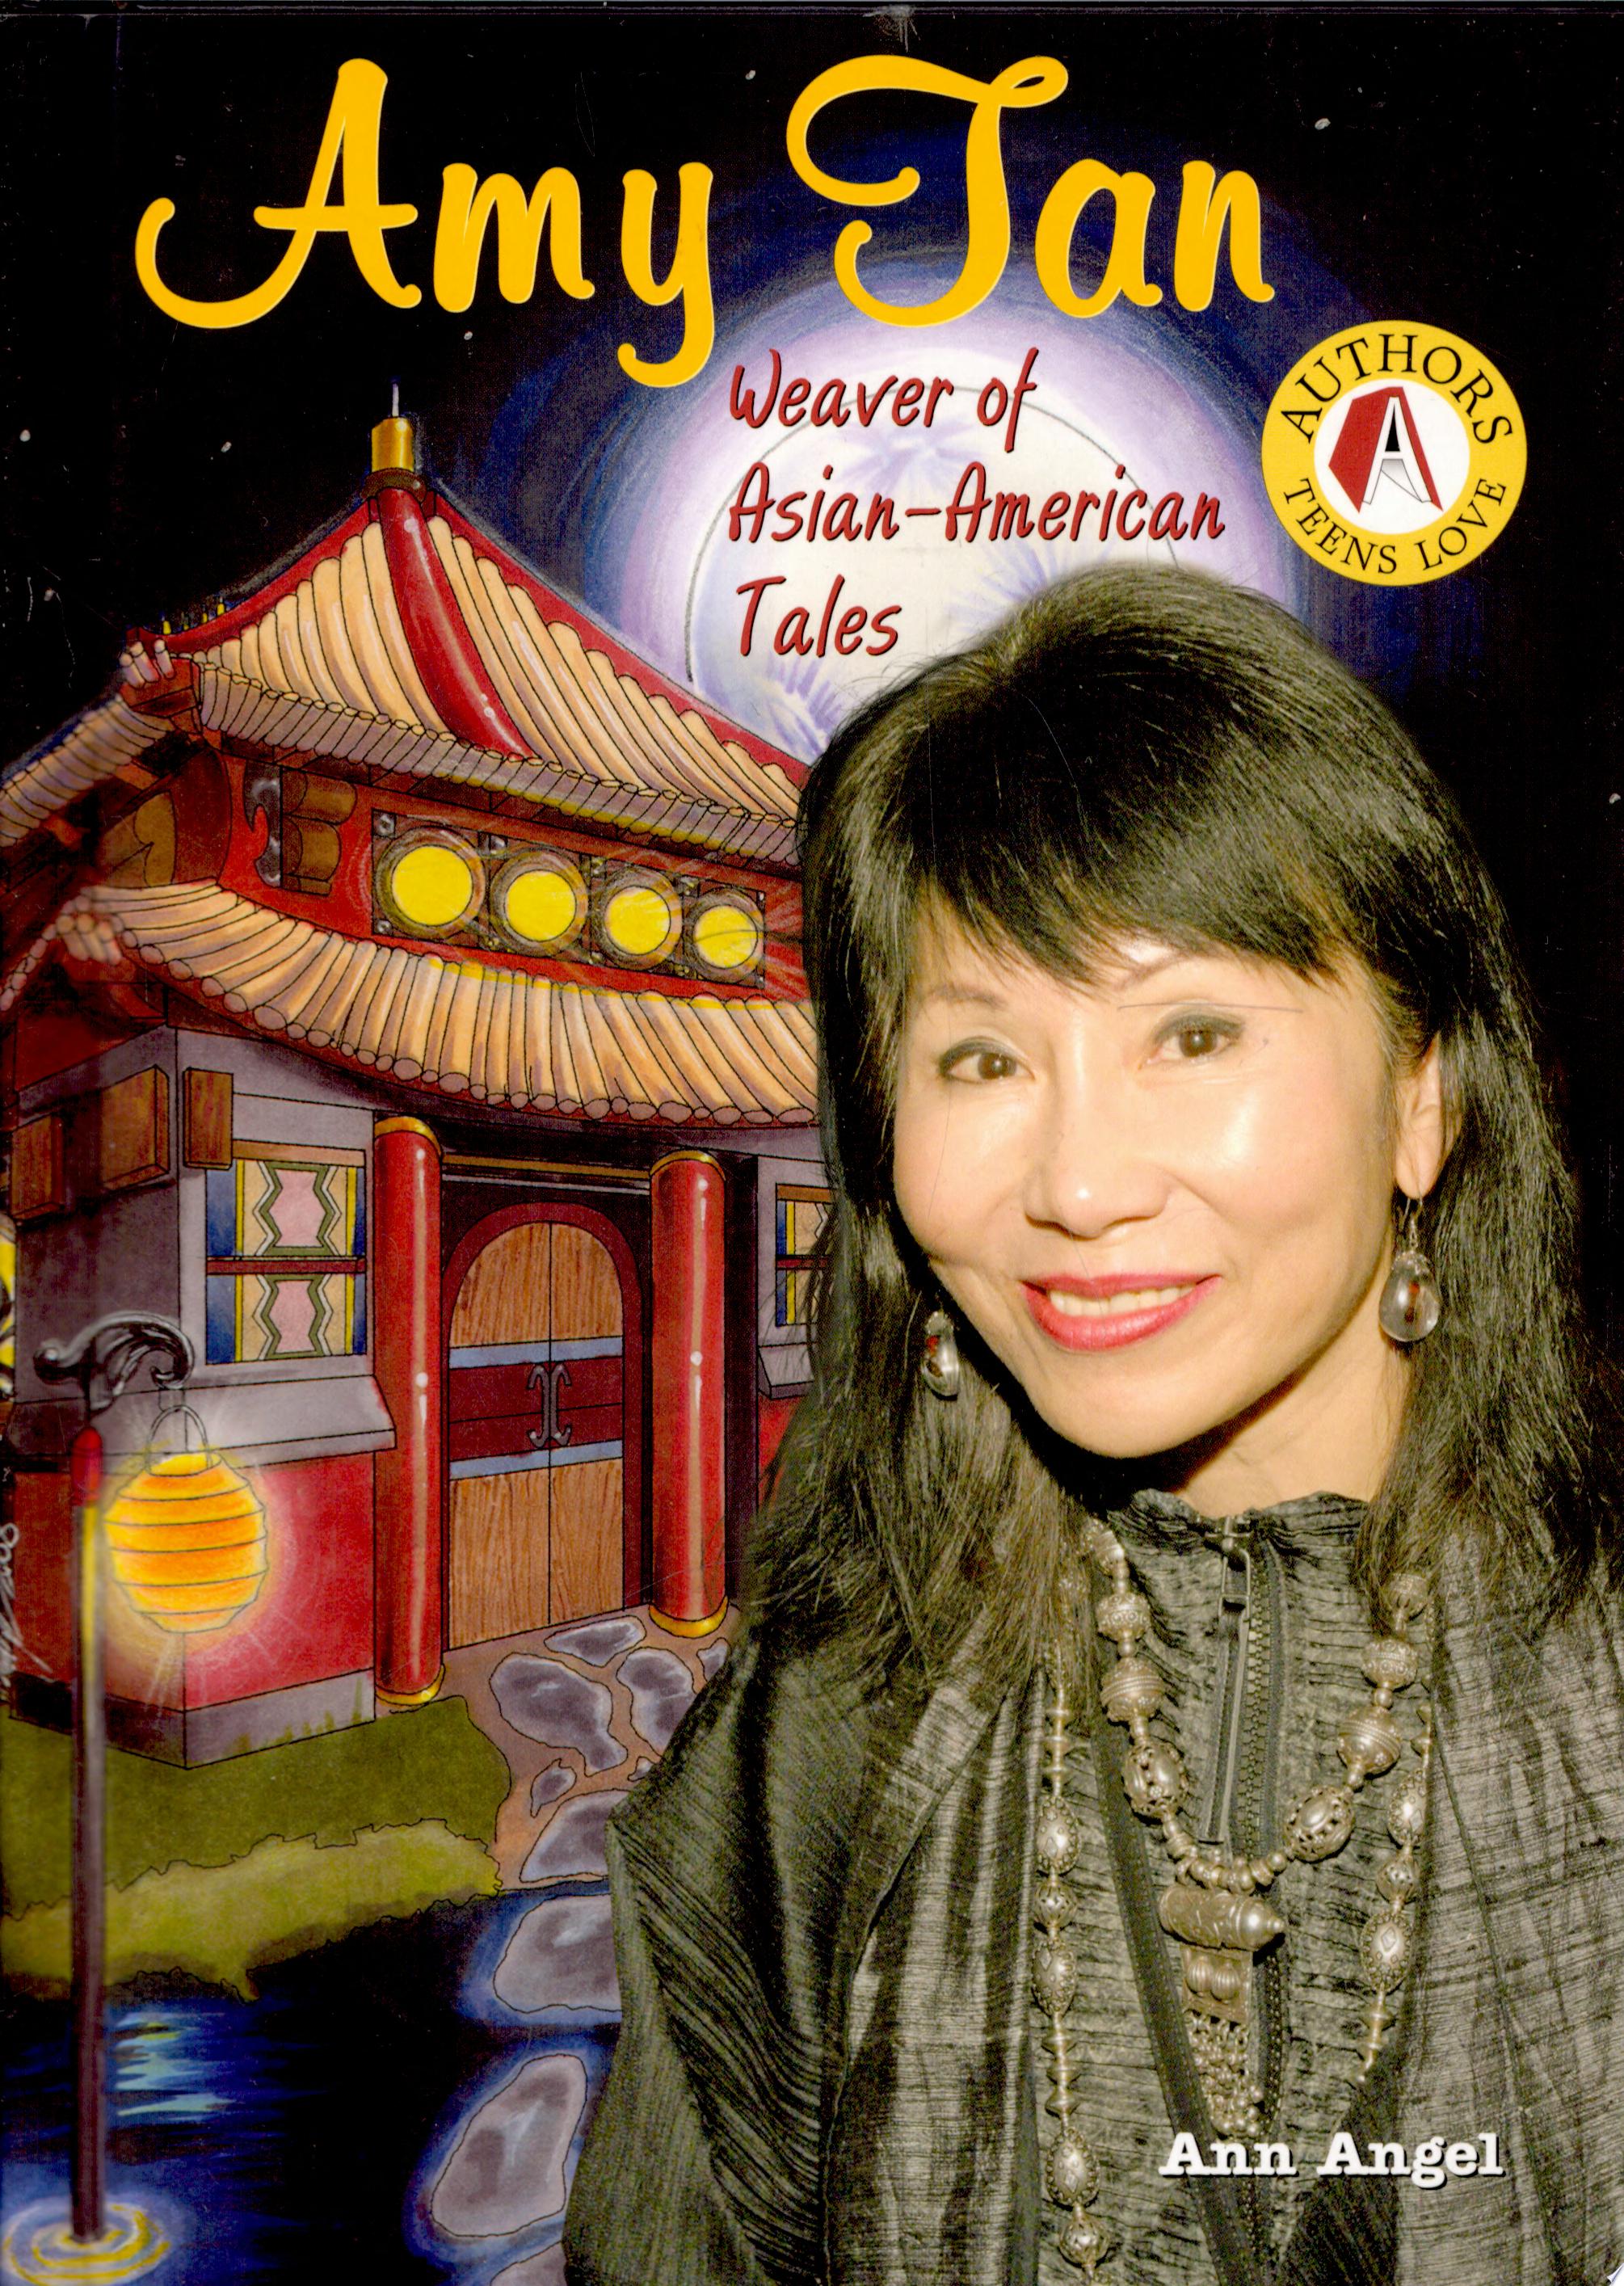 Image for "Amy Tan"